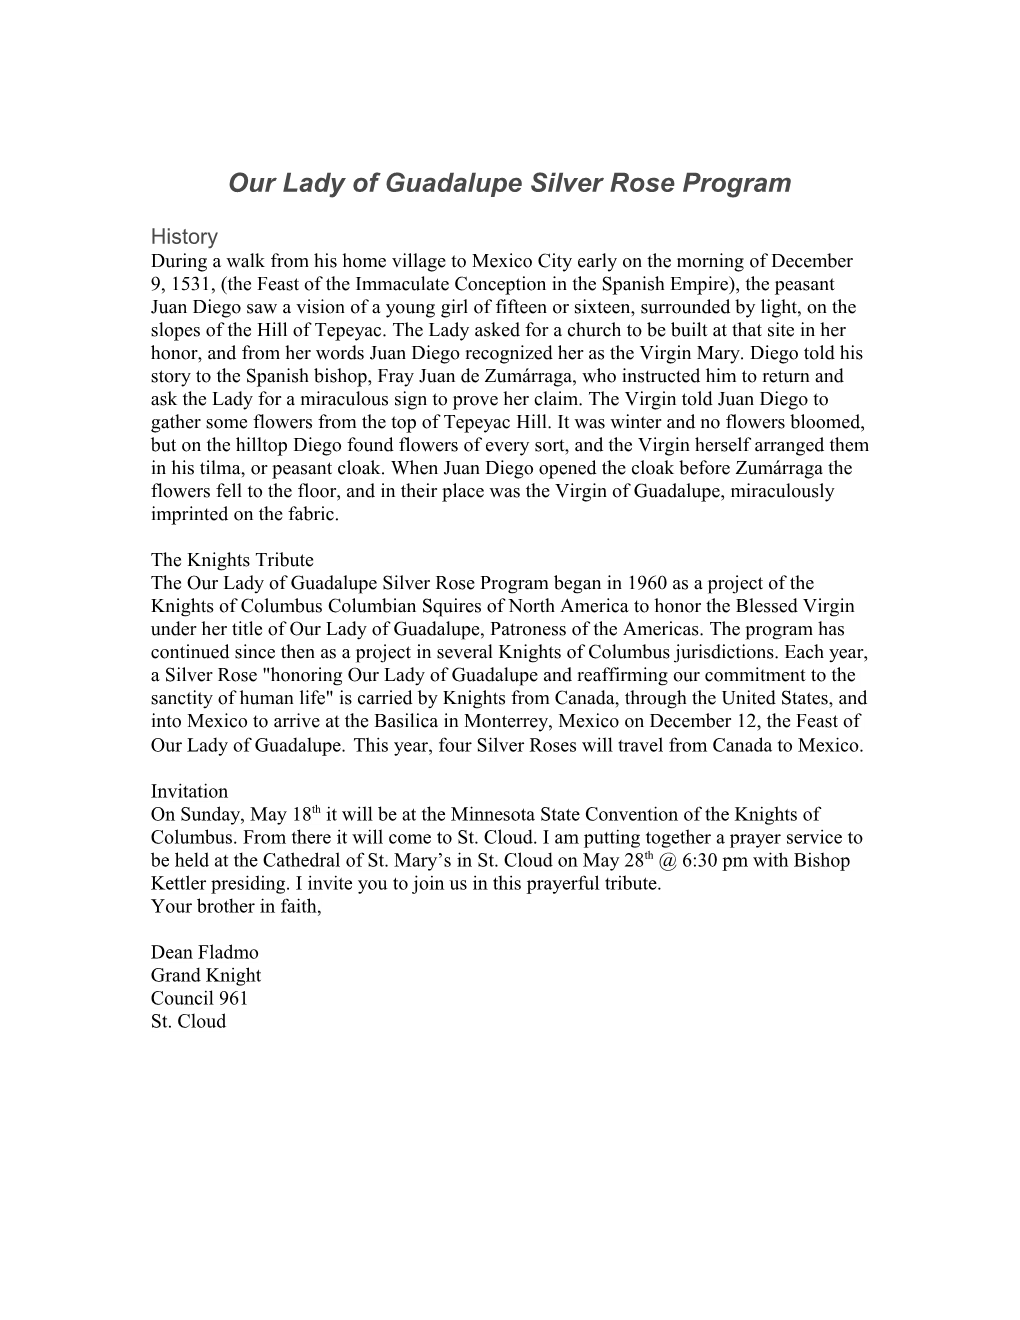 The Our Lady of Guadalupe Silver Rose Program Began in 1960 As a Project of the Knights